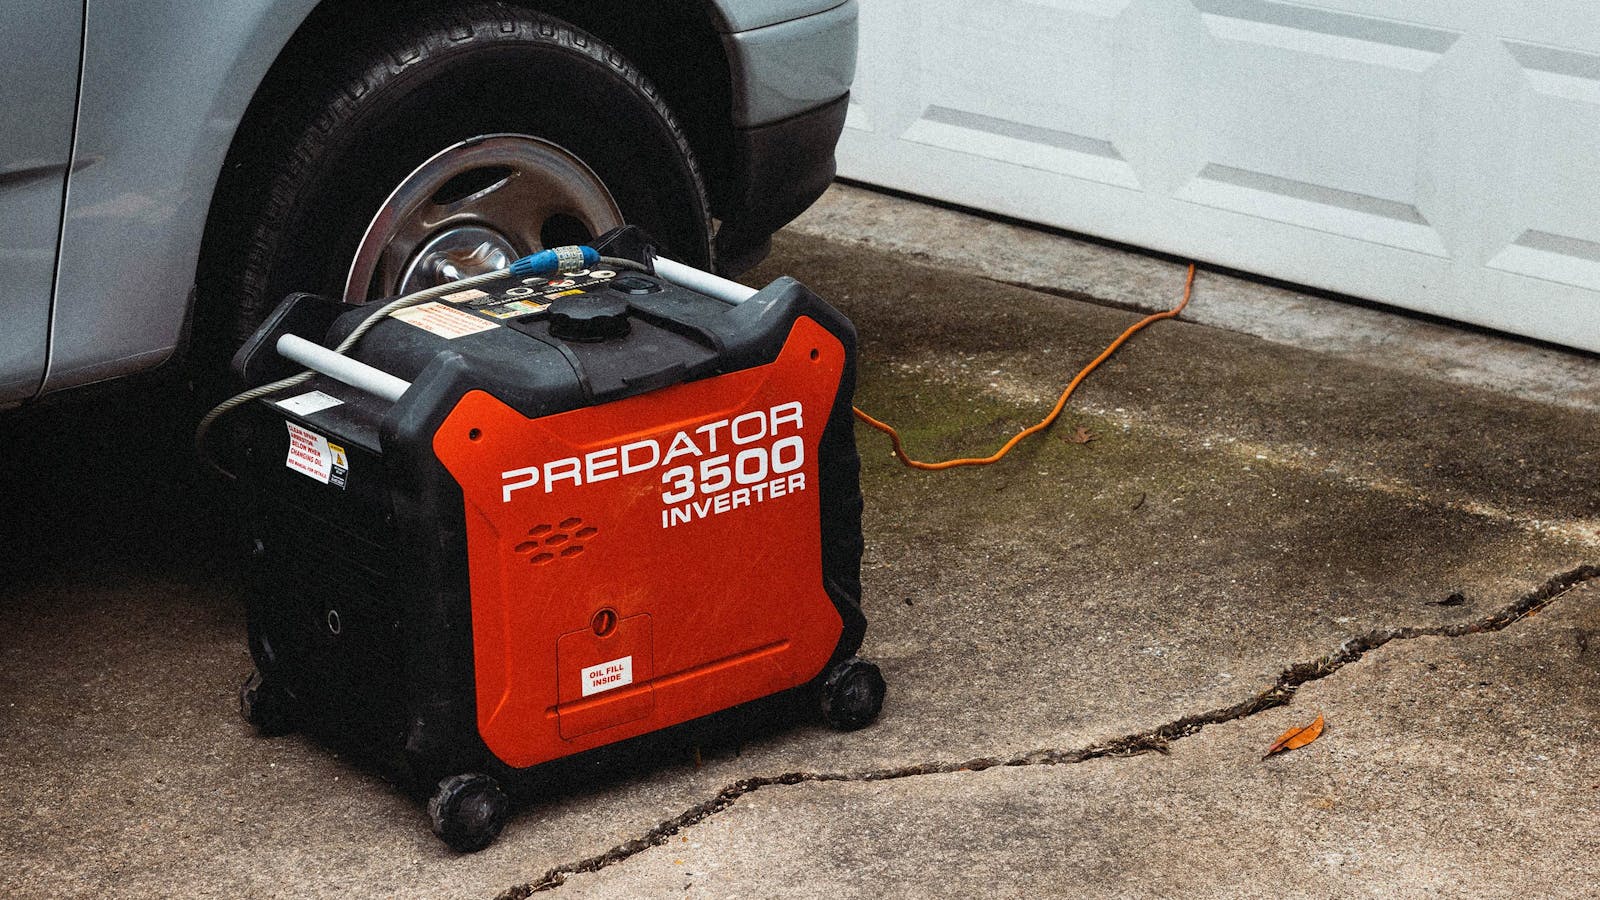 Predator 3500 Generator Problems: Troubleshooting Tips for Power Failure